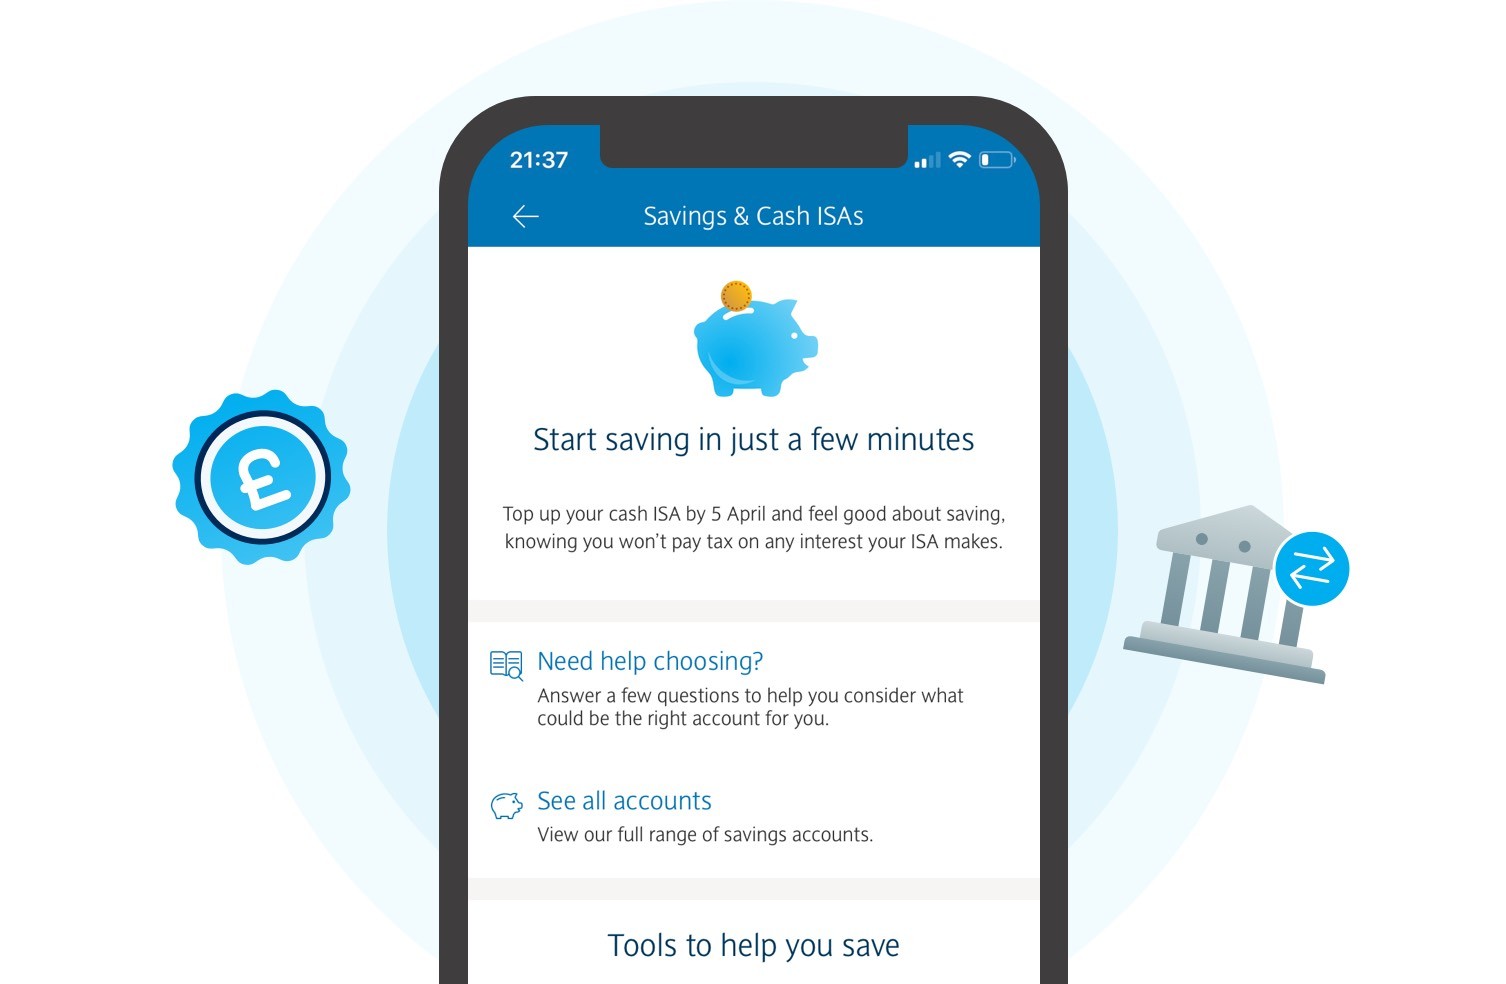 Graphic shows how to open a current and savings account in our app.